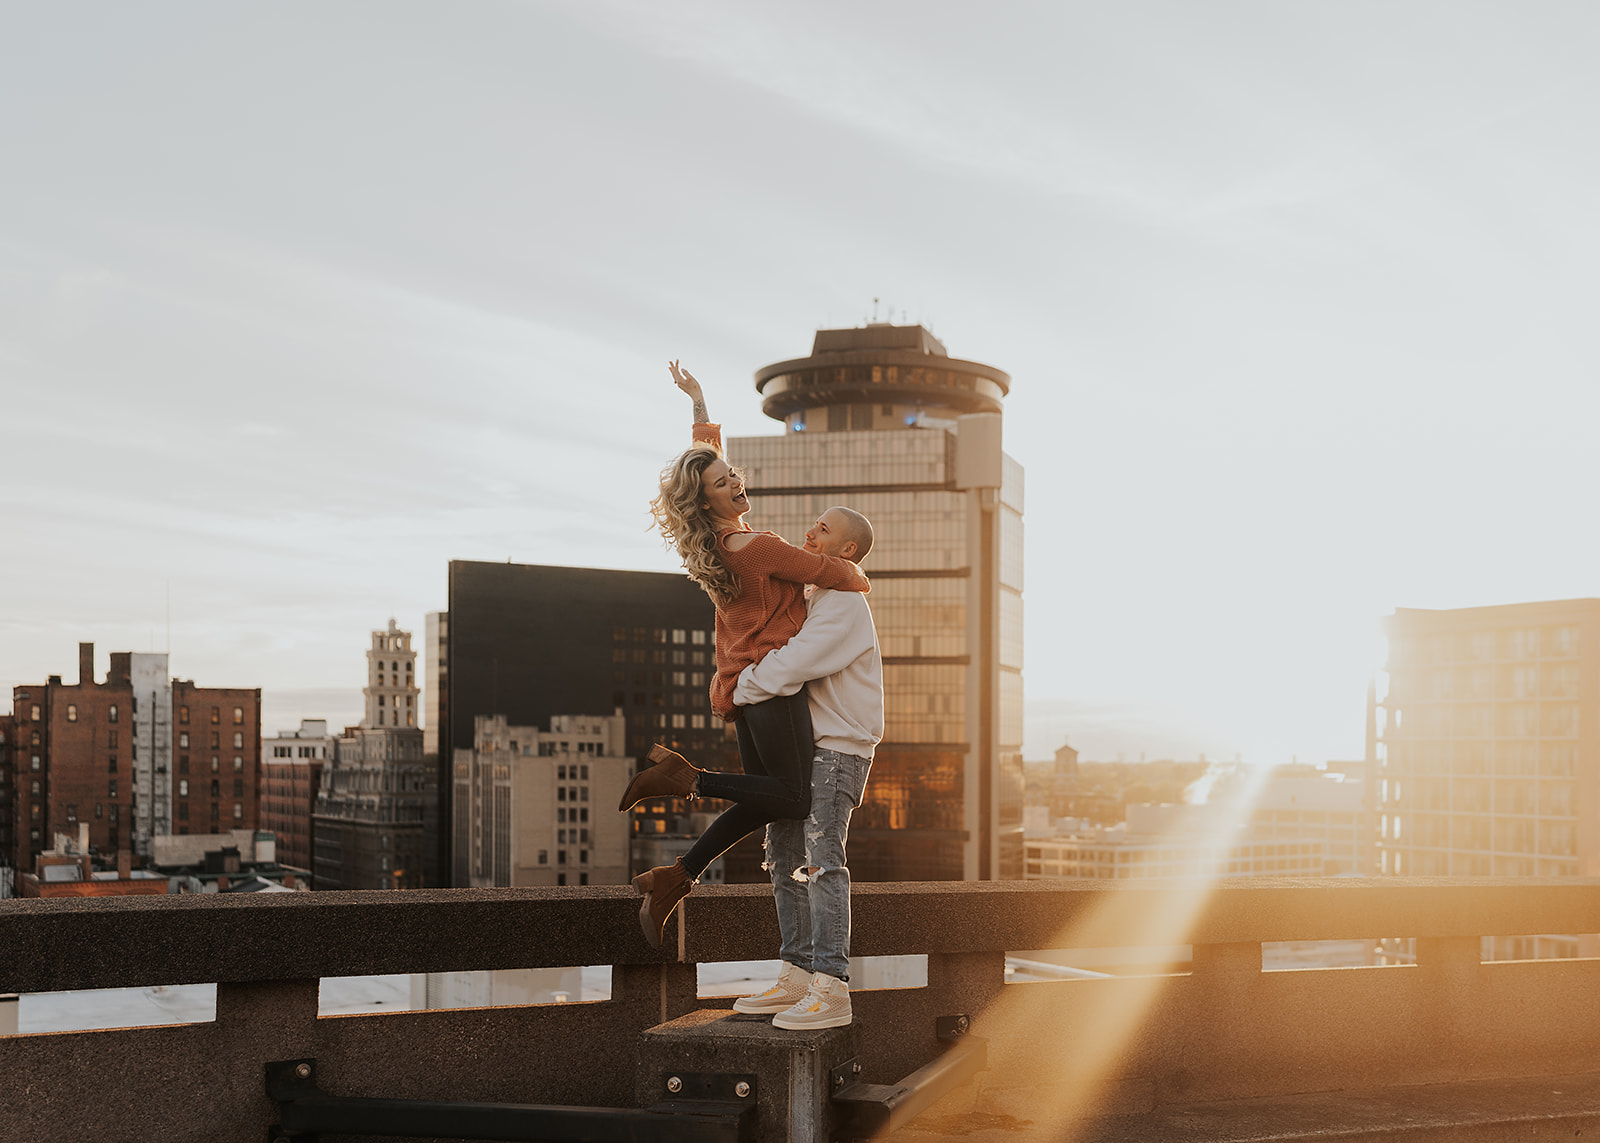 Fun couples photo on top of a parking garage in rochester ny for their engagement session